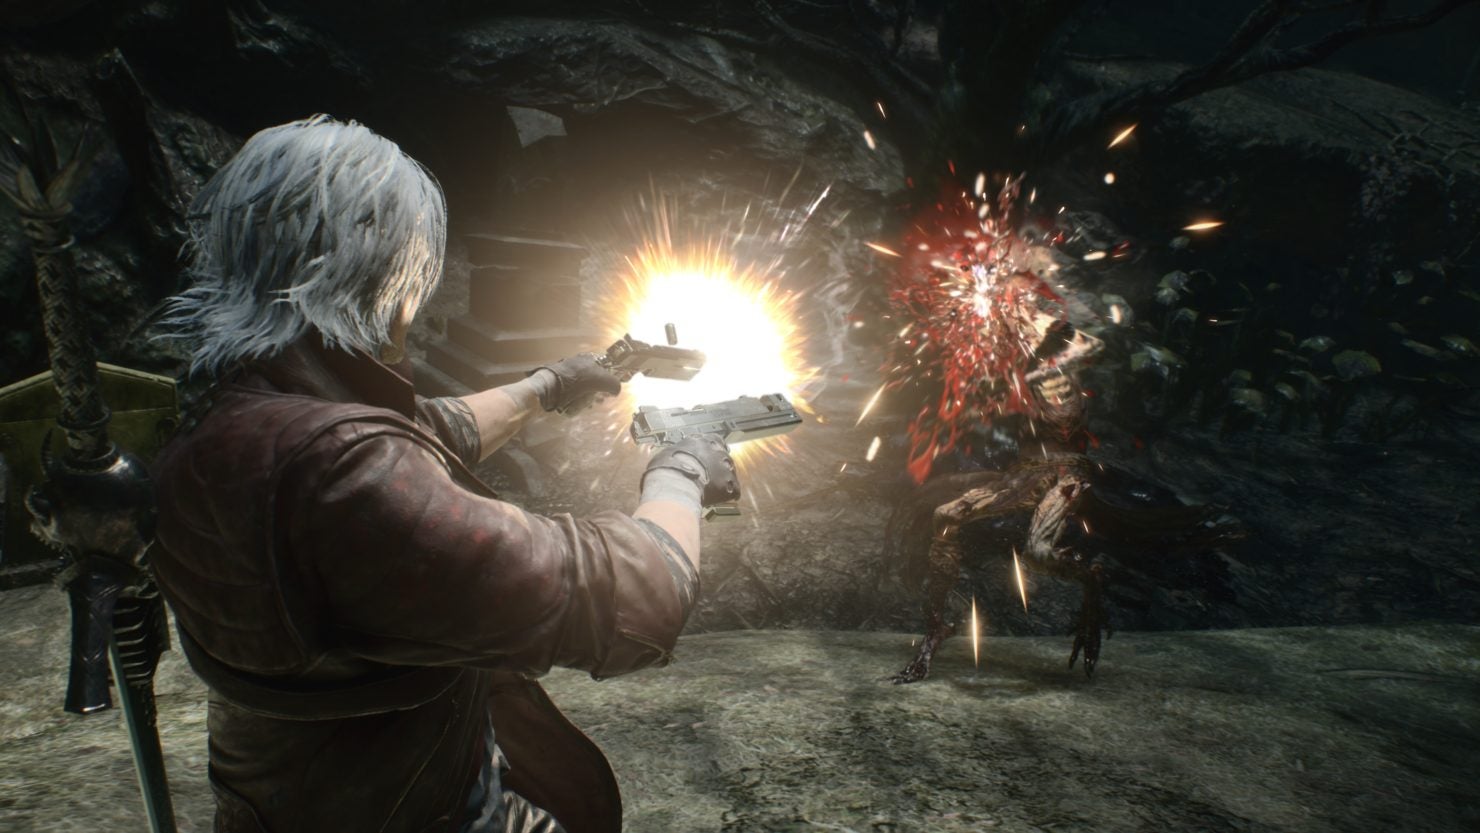 Image for Devil May Cry 5 runs smoothly on the Steam Deck, according to Capcom